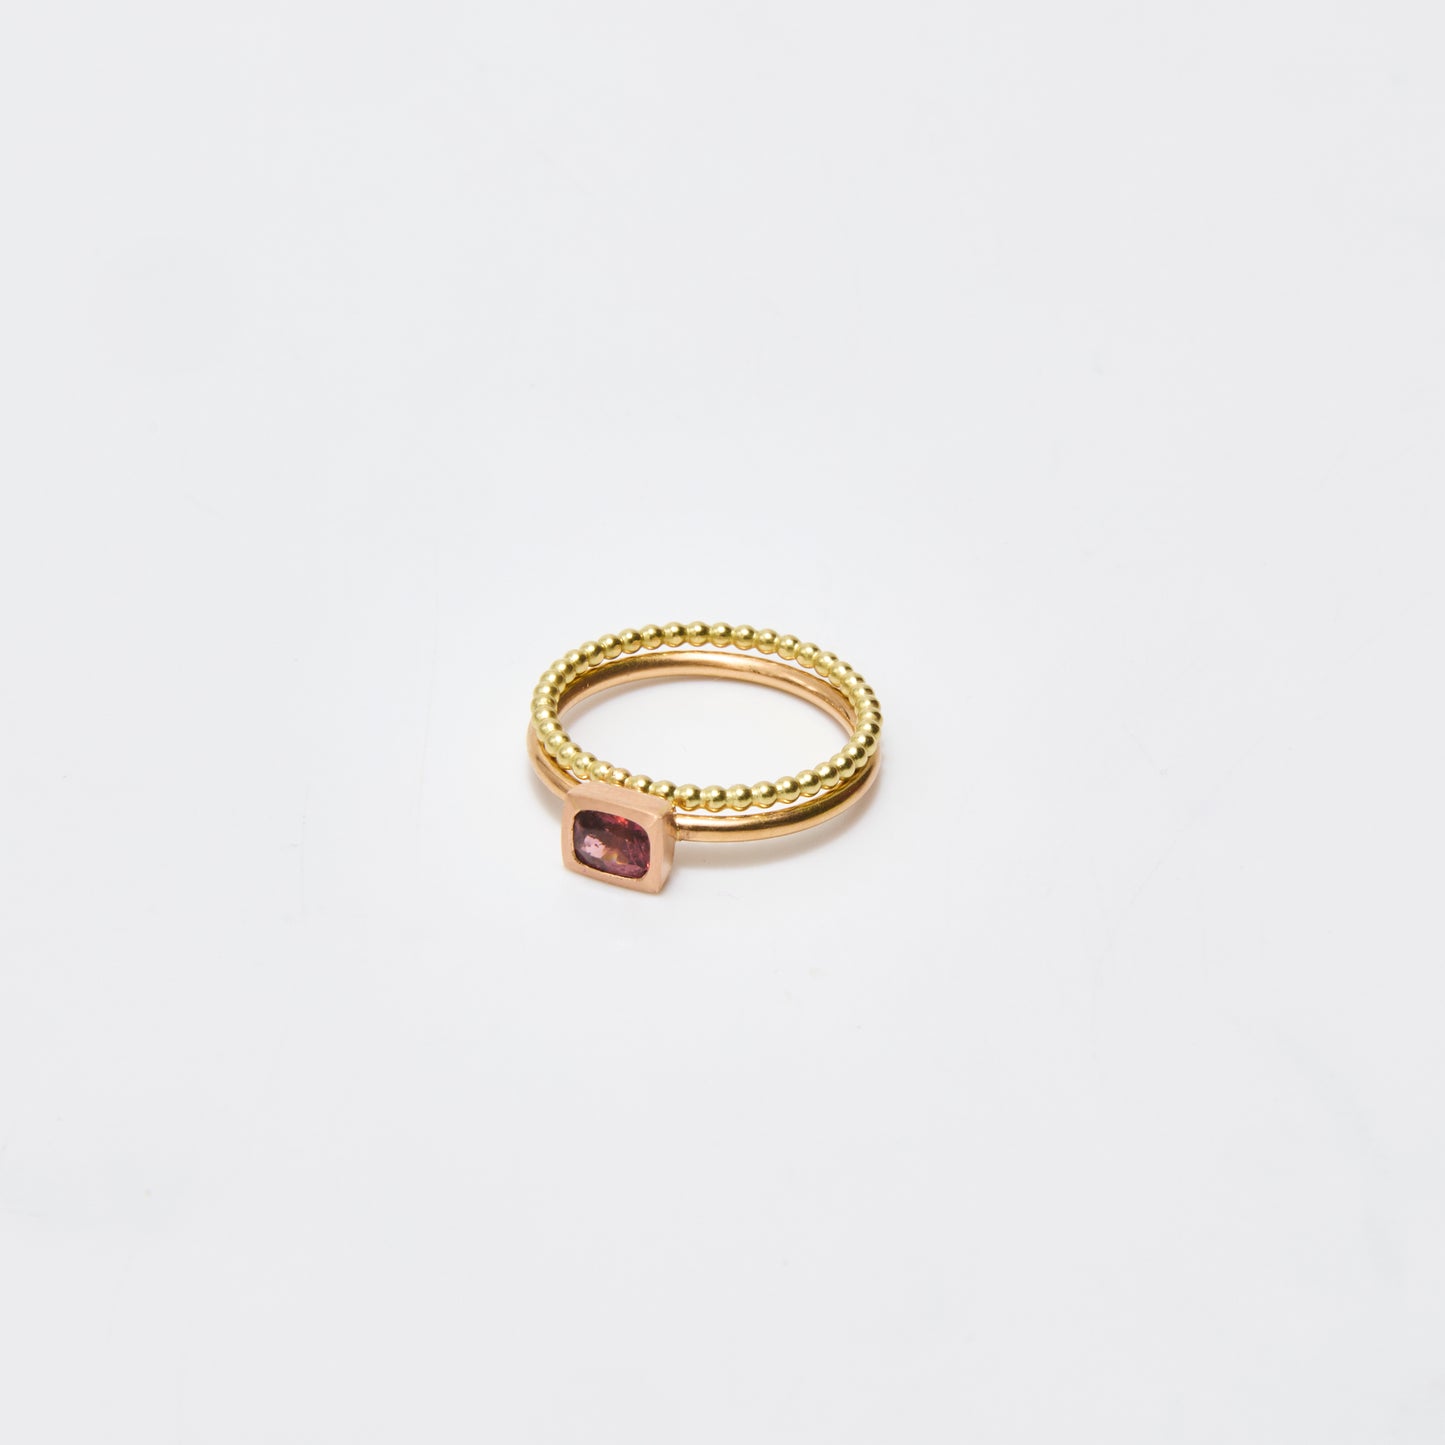 Ring "Deep Red"